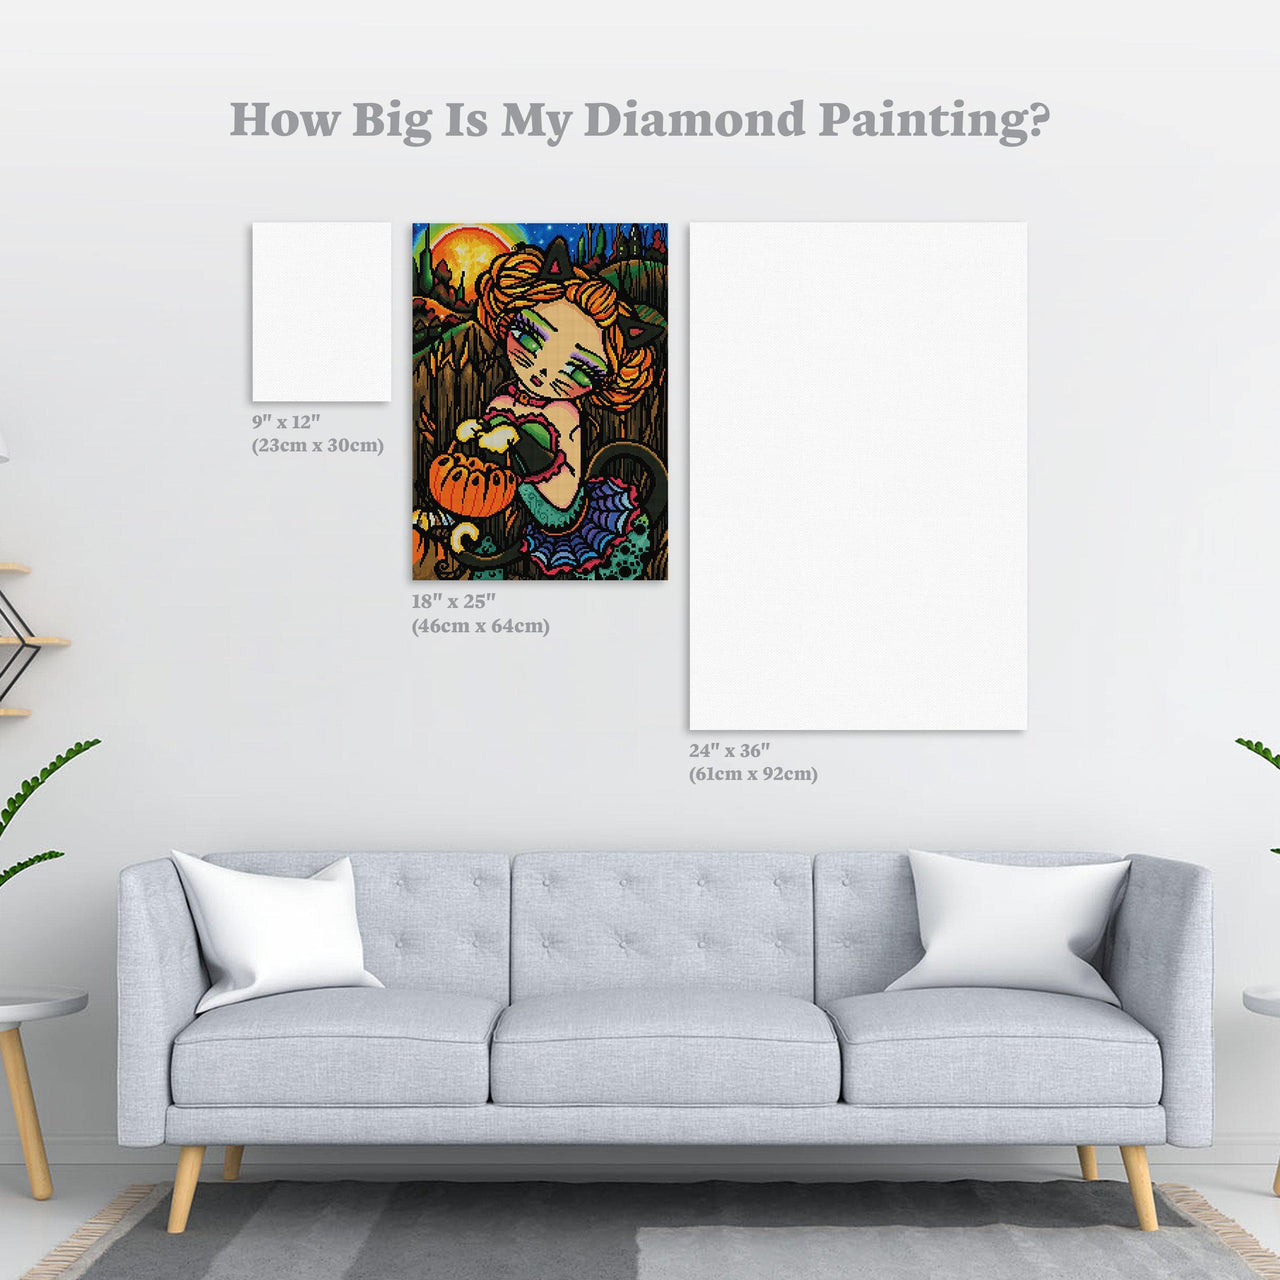 Diamond Painting Ally Kat 18" x 25″ (46cm x 64cm) / Square with 49 Colors including 3 ABs / 45,790